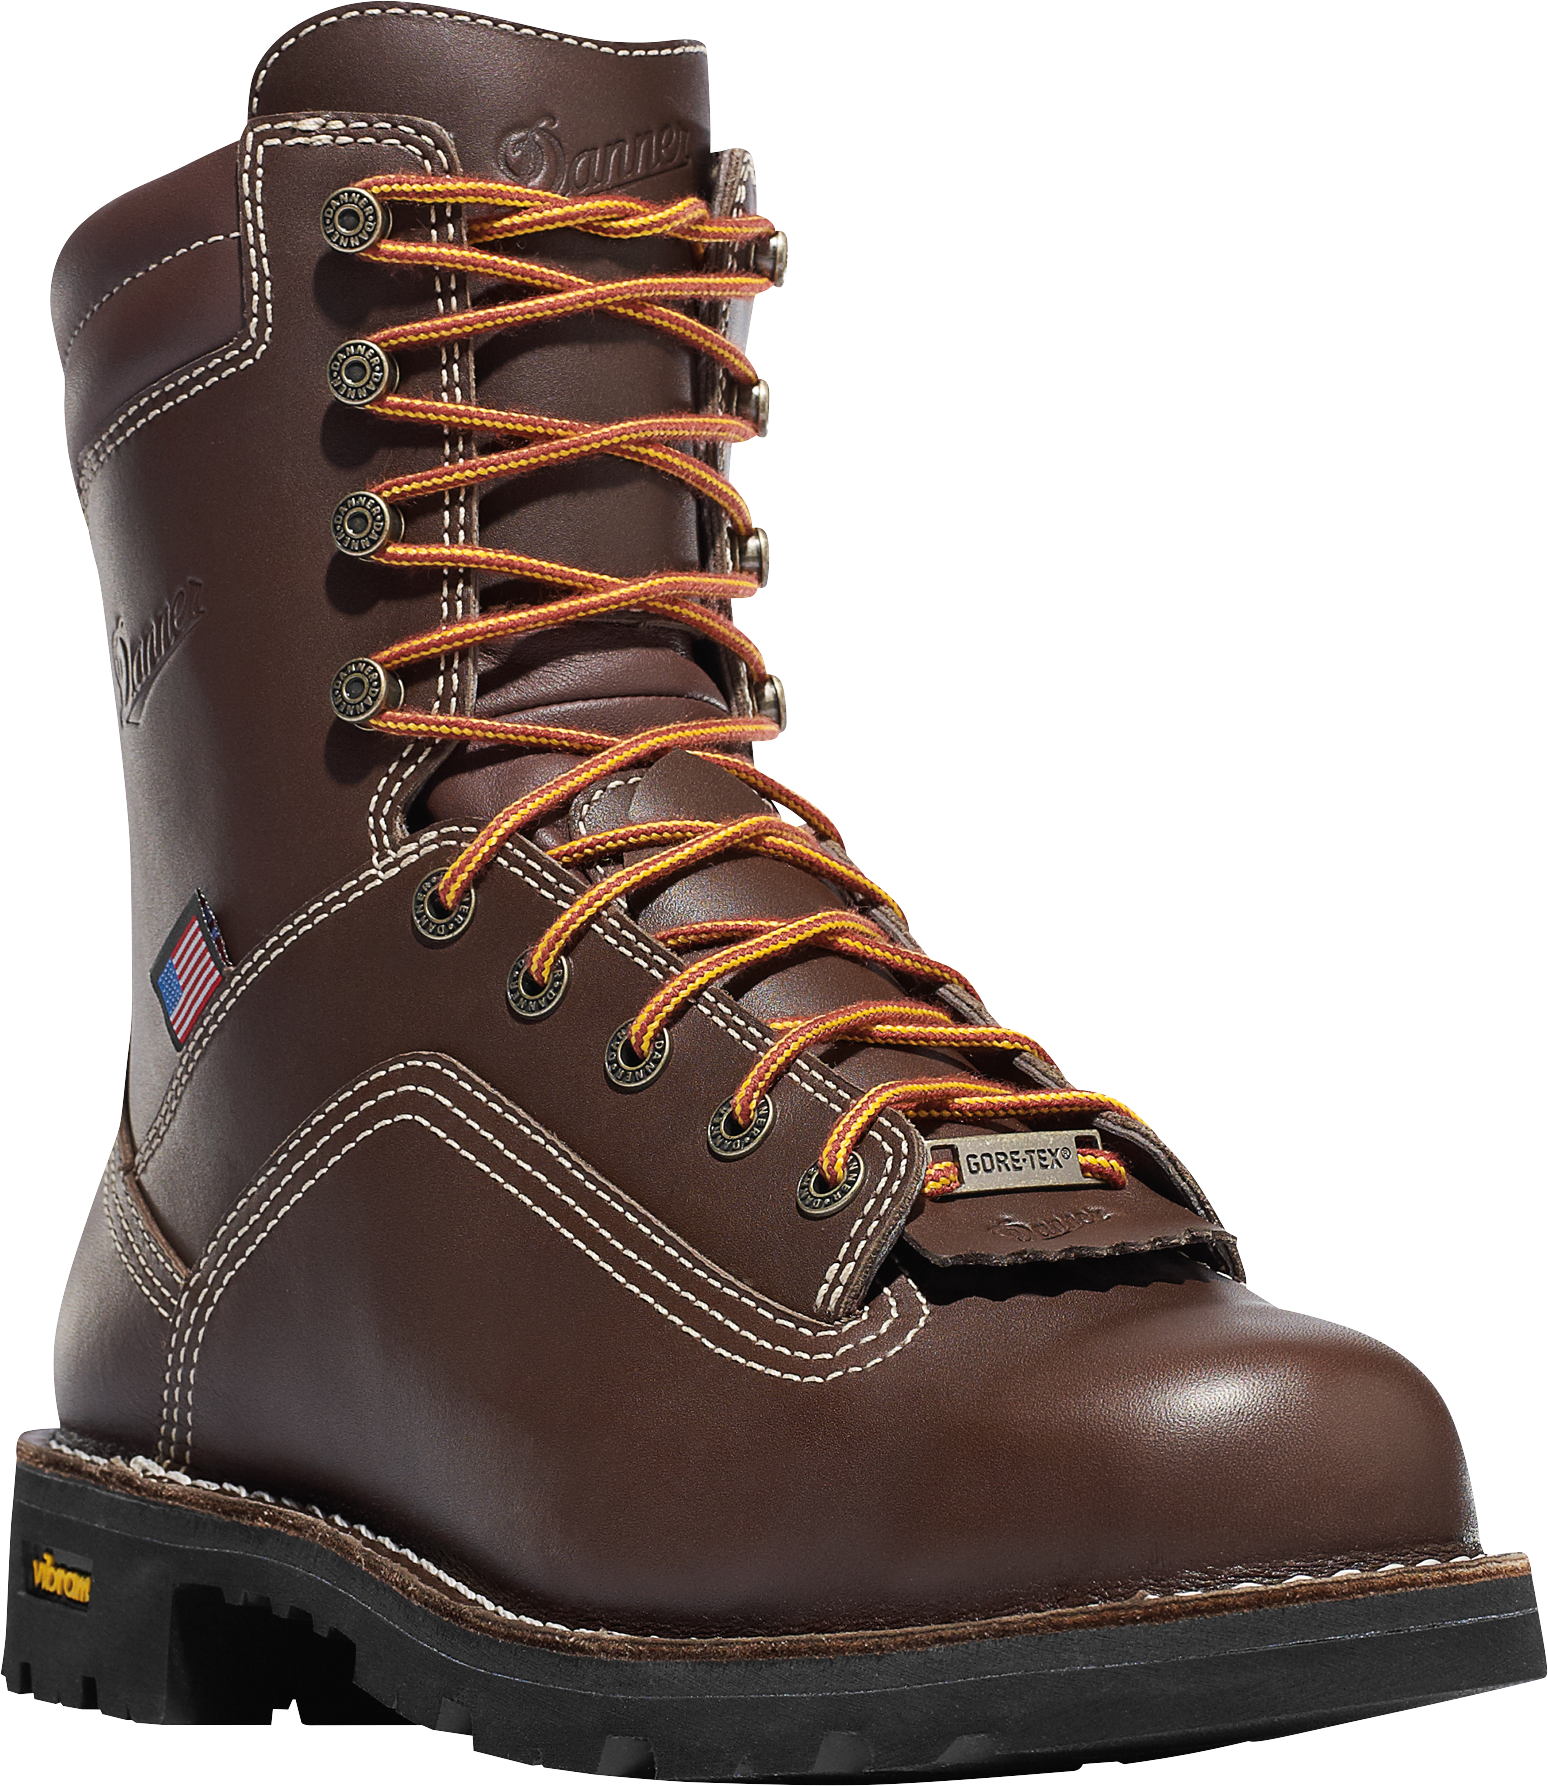 Danner Quarry USA Brown GORE-TEX Alloy Toe Work Boots for Men - Brown - 14M